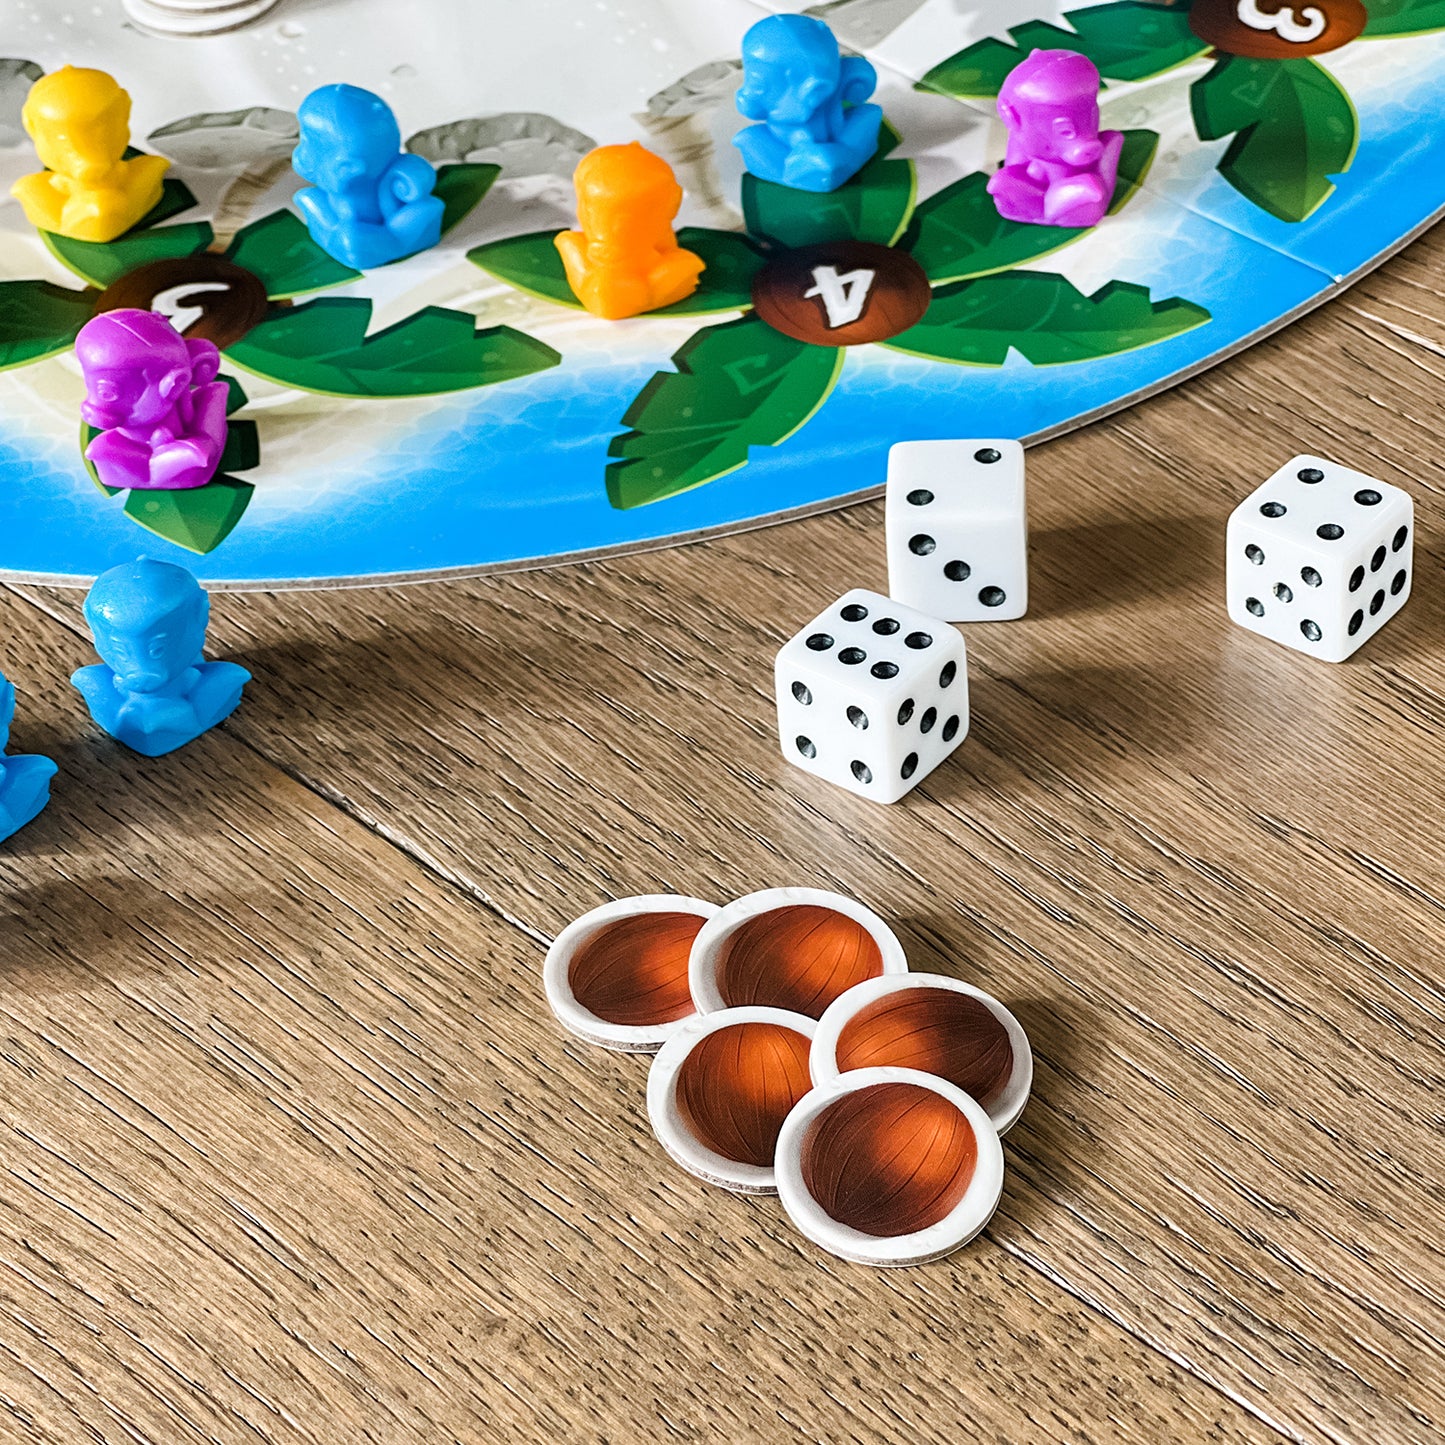 Isle of Coconuts by SimplyFun is a fun math game focusing on addition, predicting and decision making for ages 8 and up.